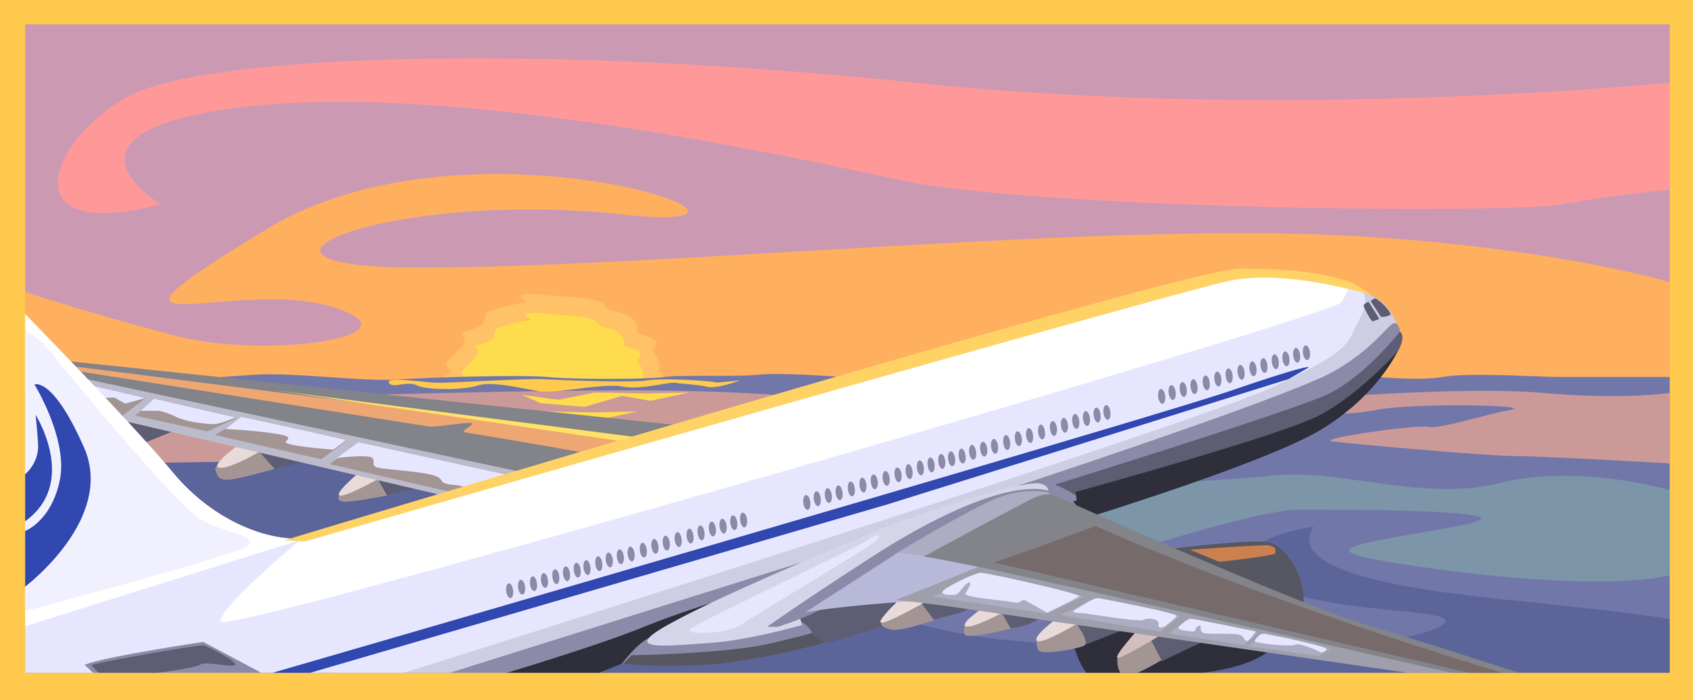 Vector Illustration of Commercial Jet Airplane Airline in Flight Flying in Sunset